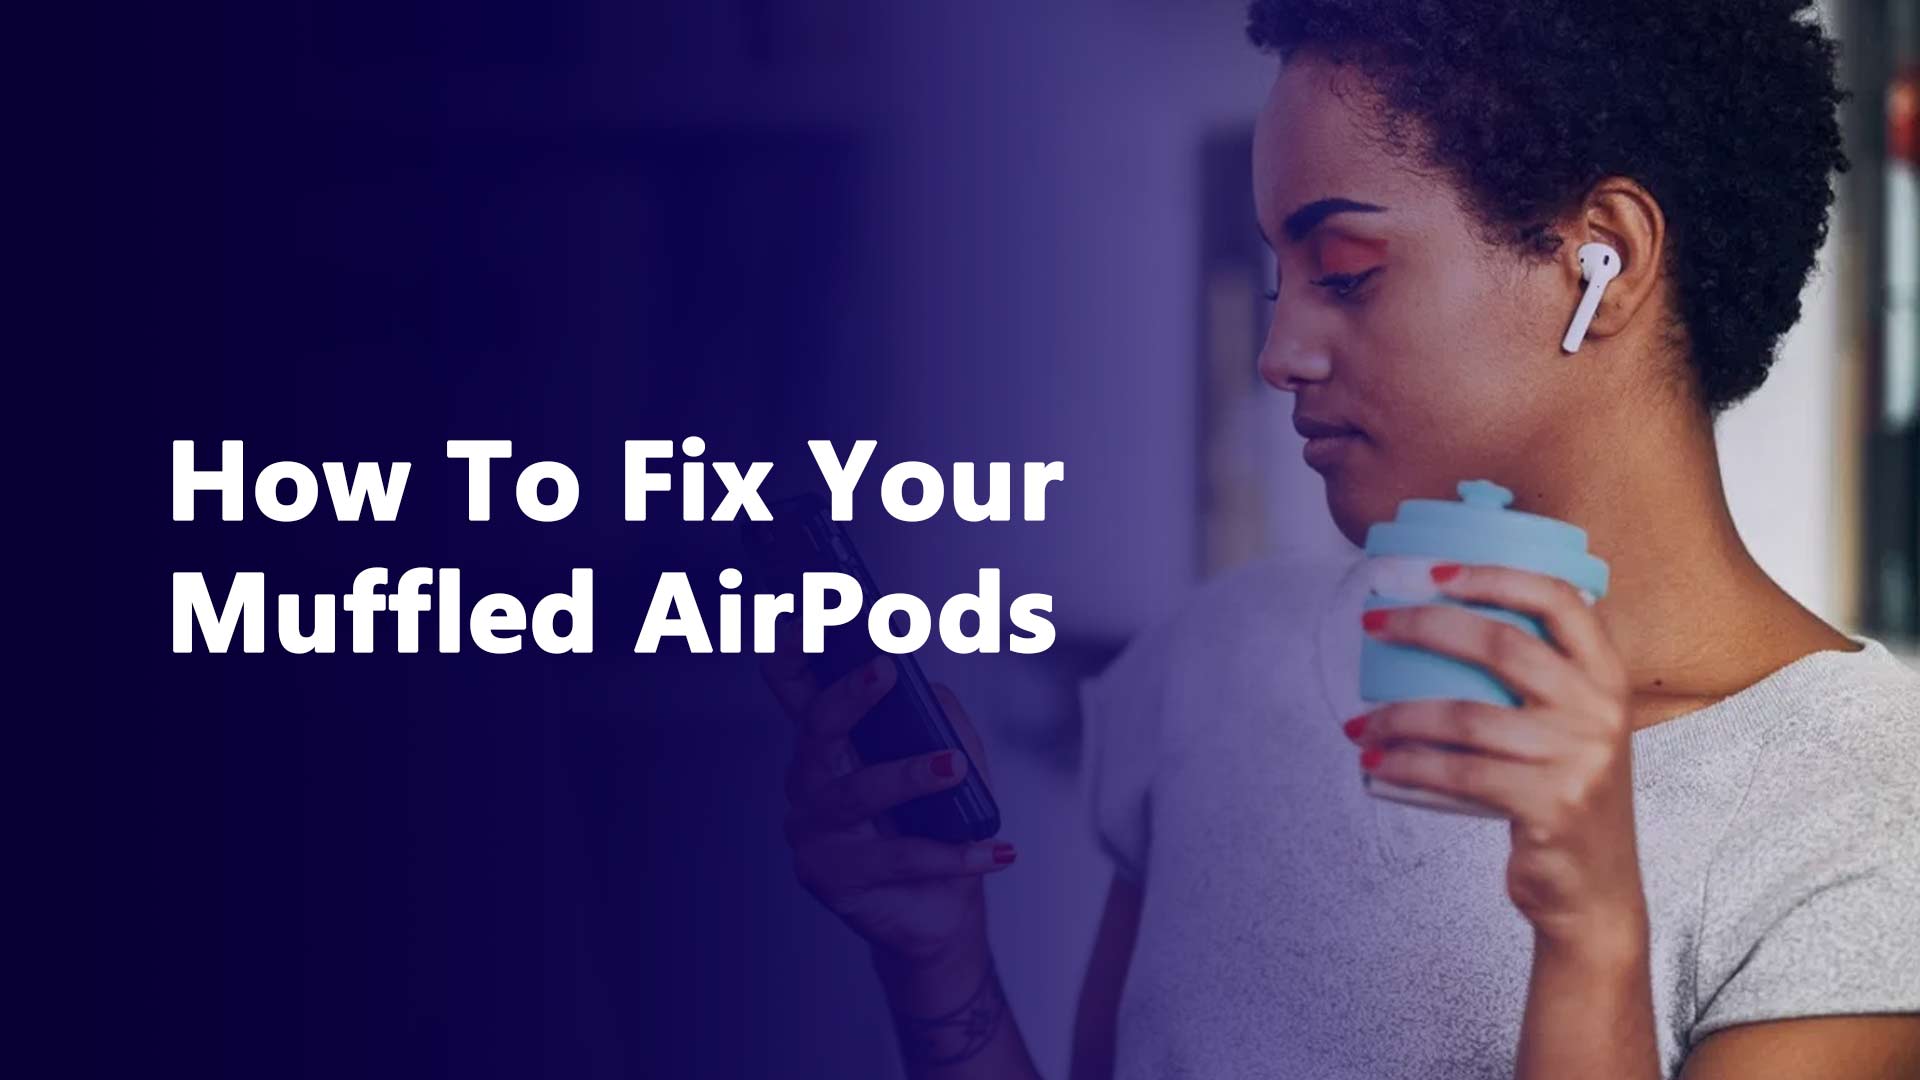 How To Fix Your Muffled AirPods